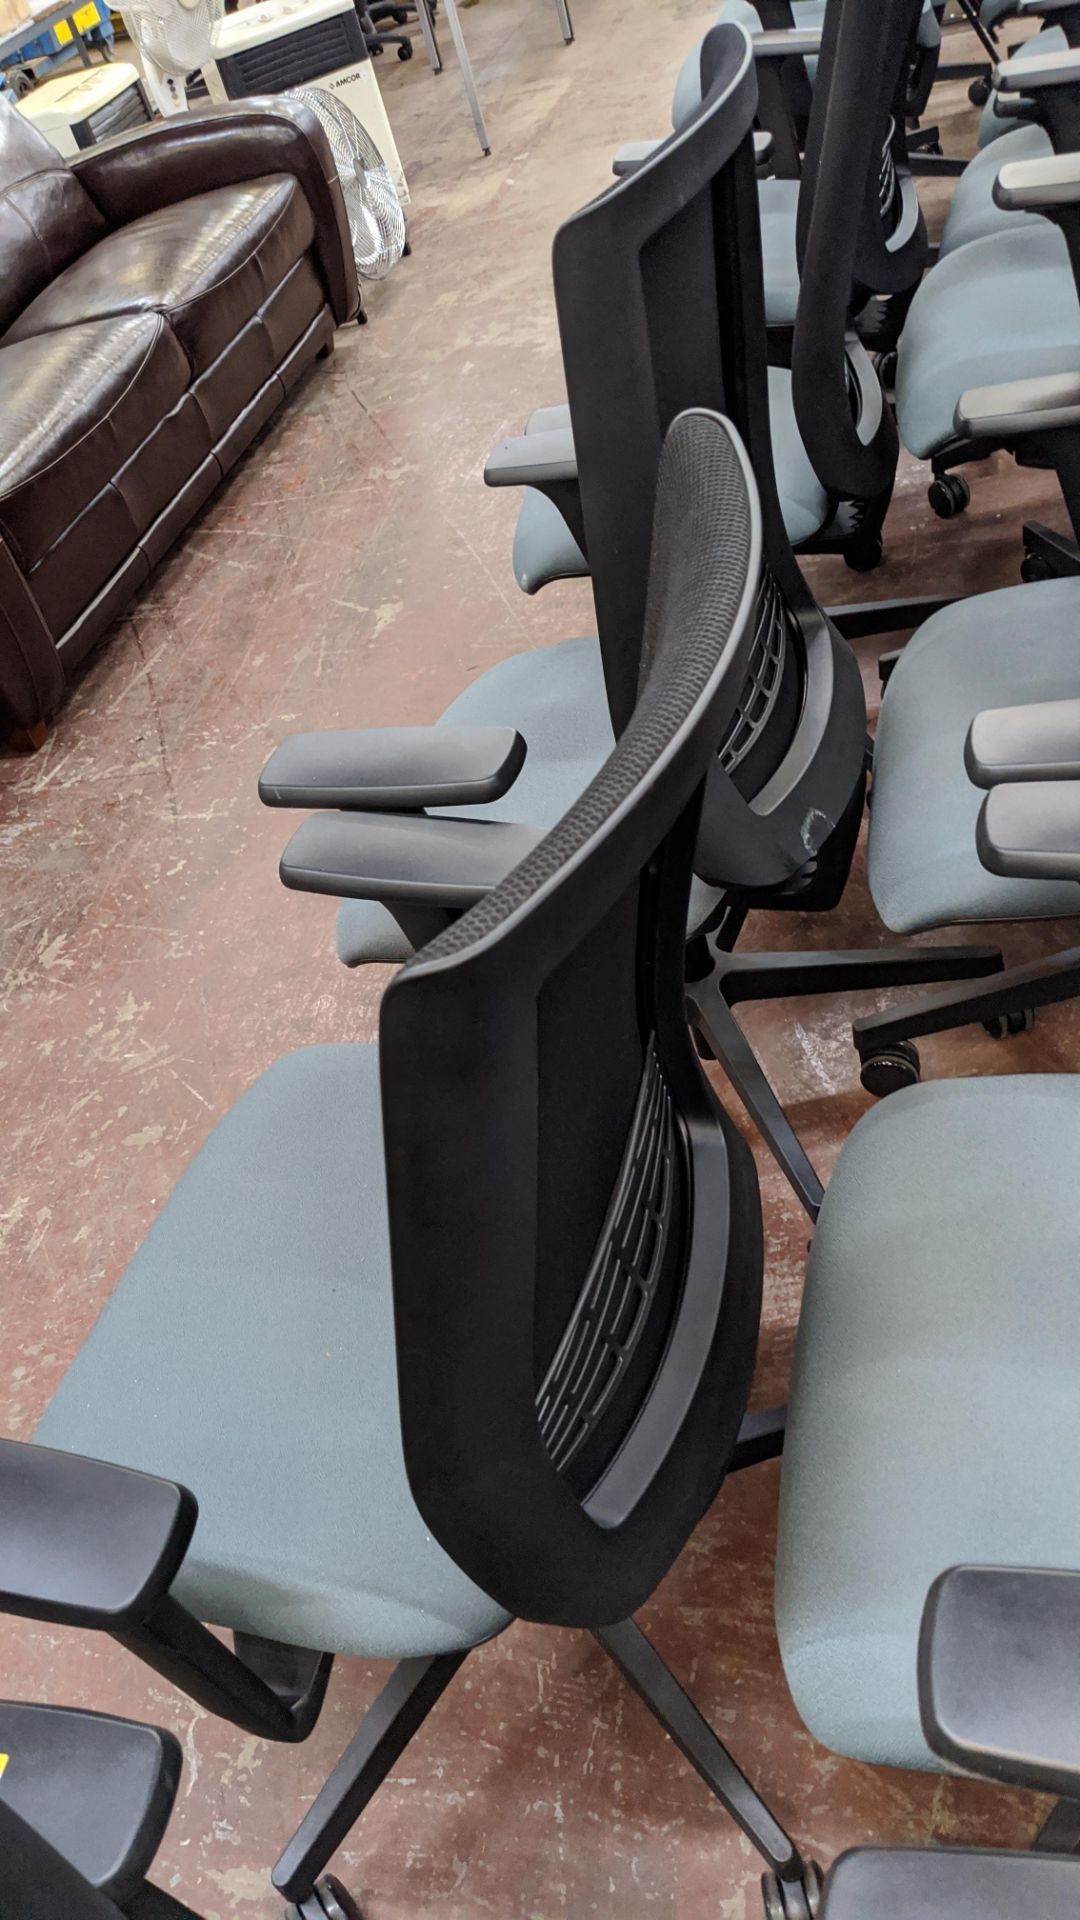 6 off Edge Design modern office chairs with arms, incorporating green/grey fabric seat bases & black - Image 7 of 7